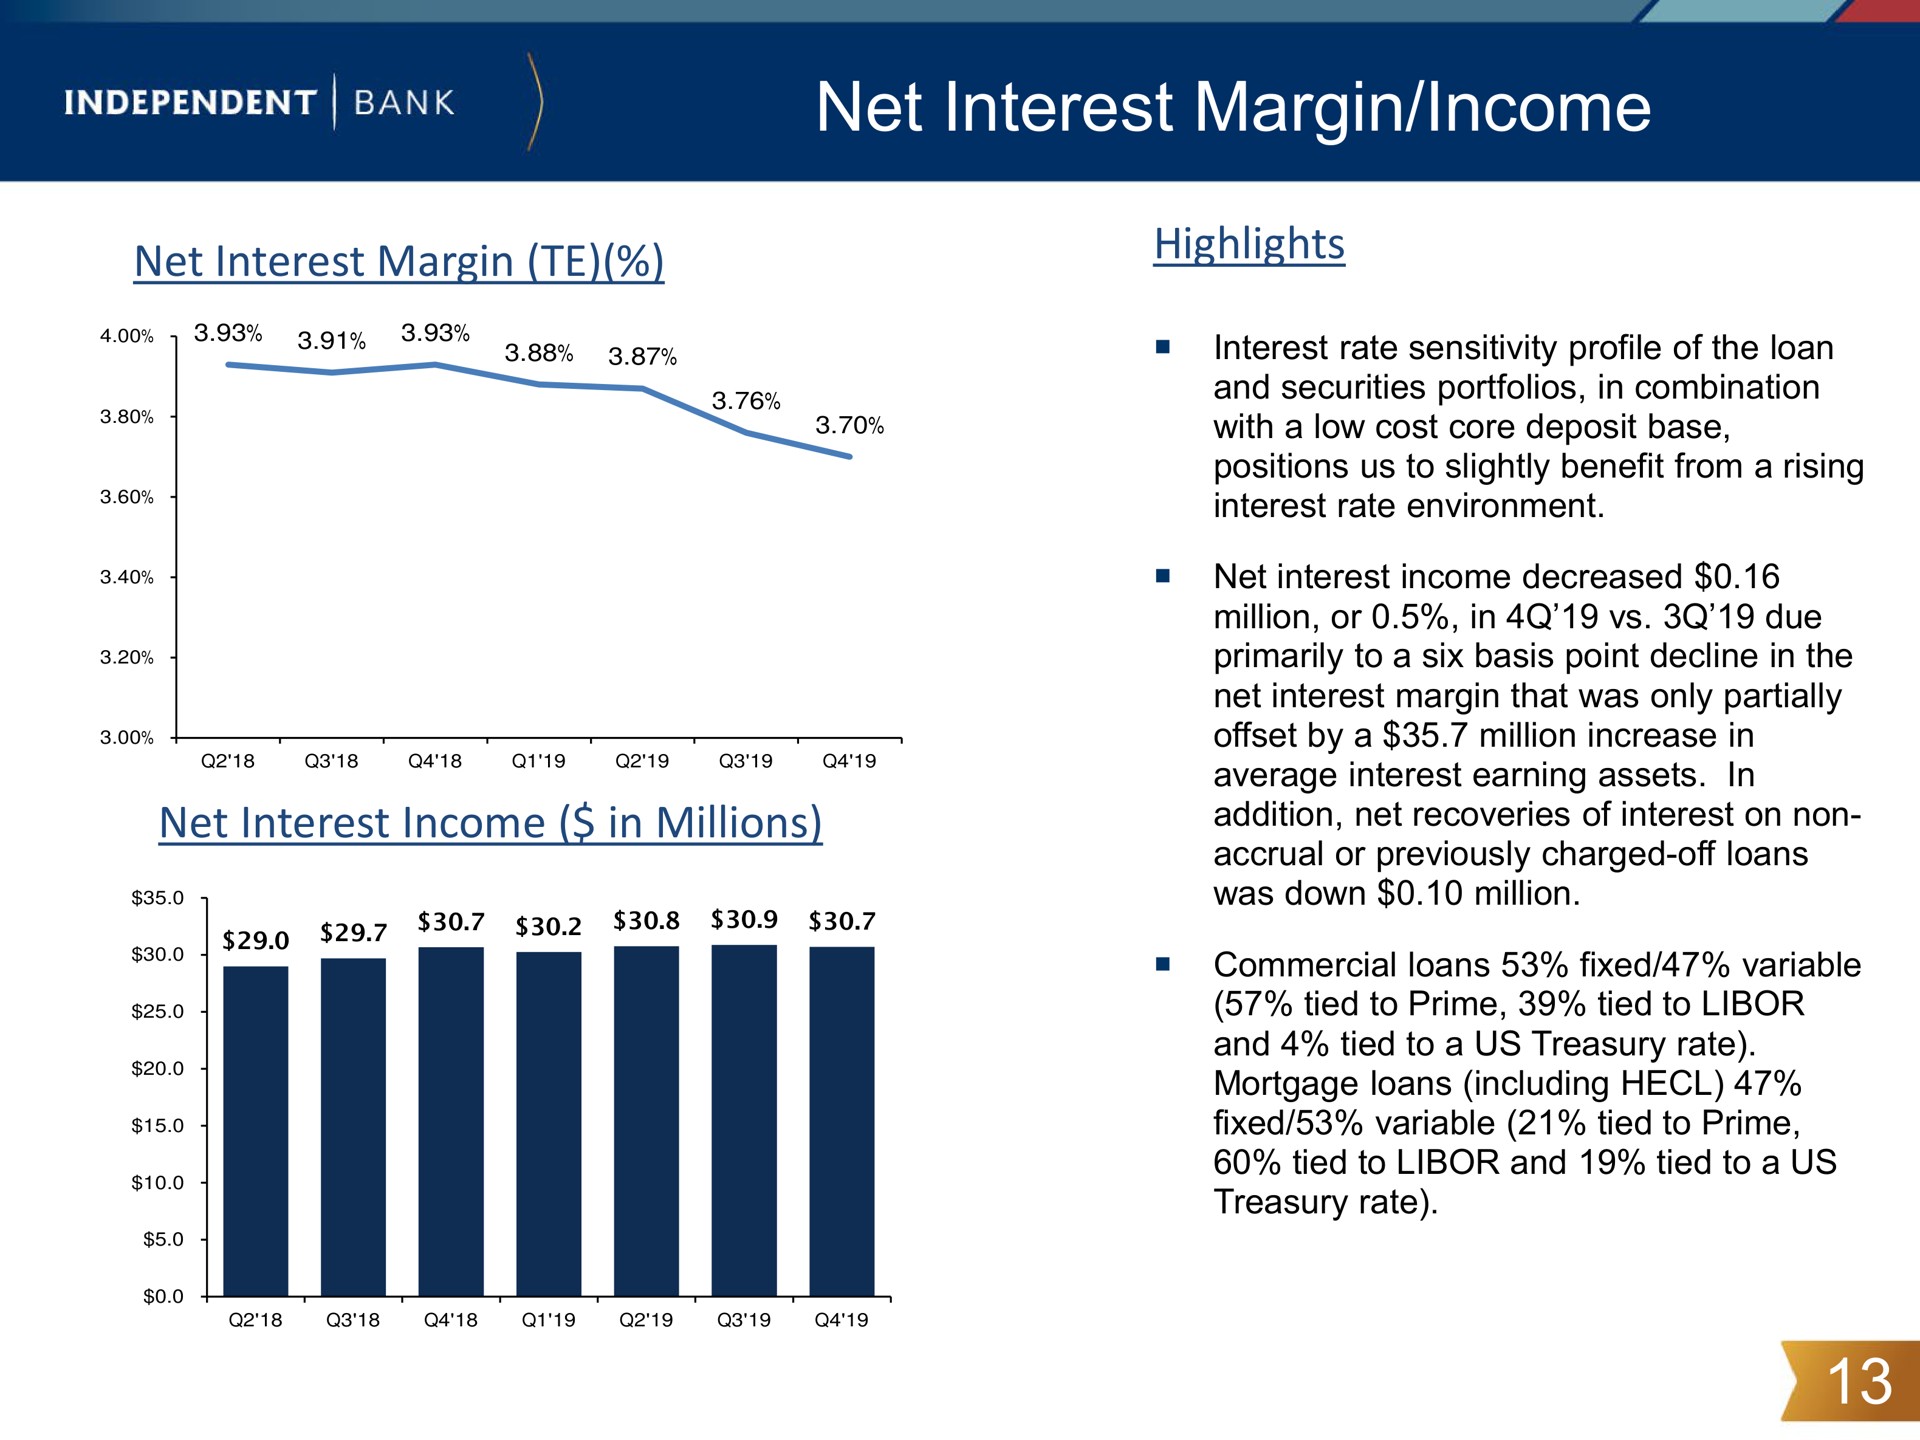 net interest margin income as | Independent Bank Corp